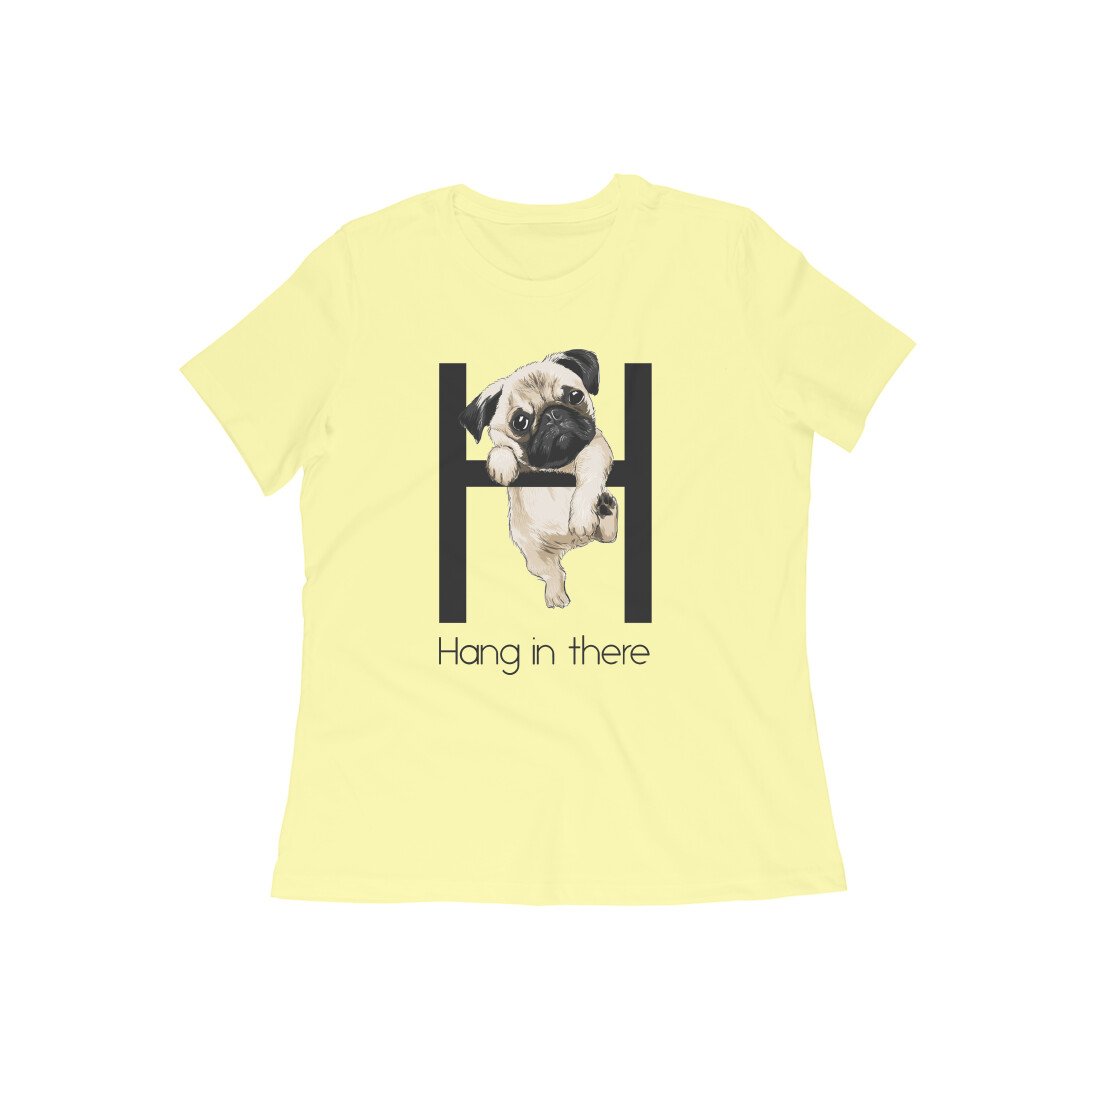 Stepevoli Clothing - Round Neck T-Shirt (Women) - Hang In There Pug (12 Colours)